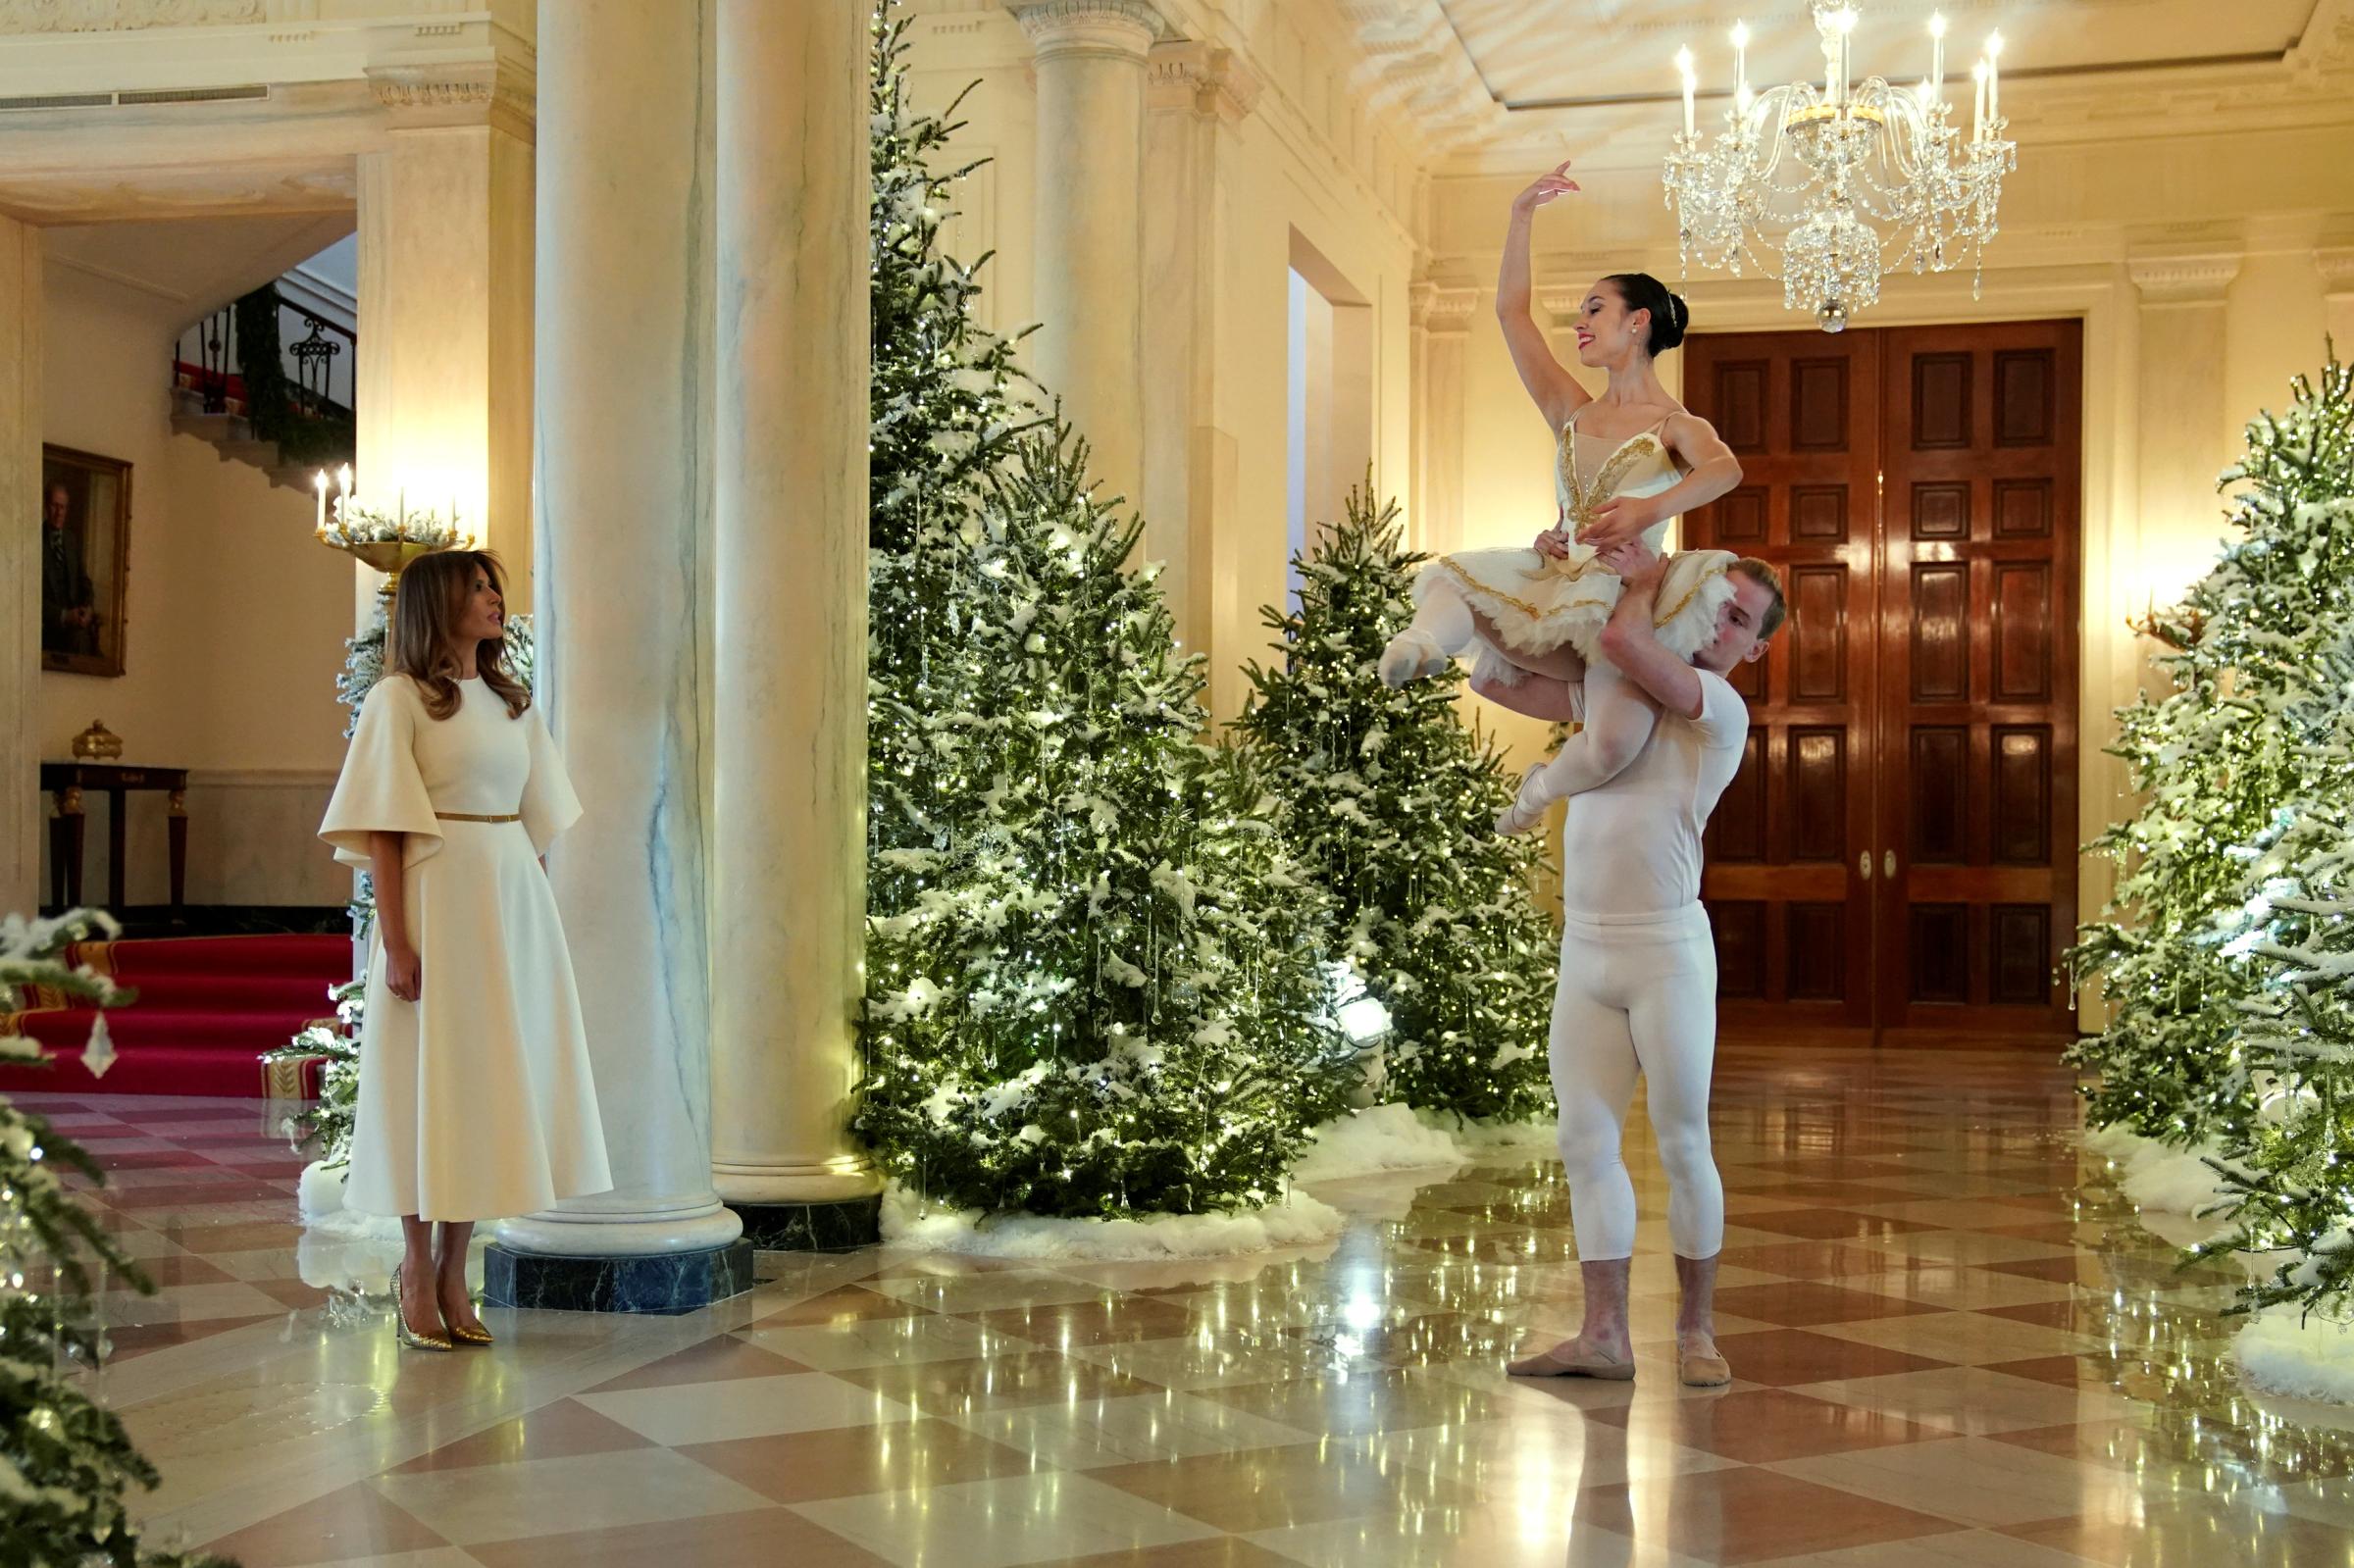 Ballet dancers perform as U.S. first lady Melania Trump begins a tour of the holiday decorations